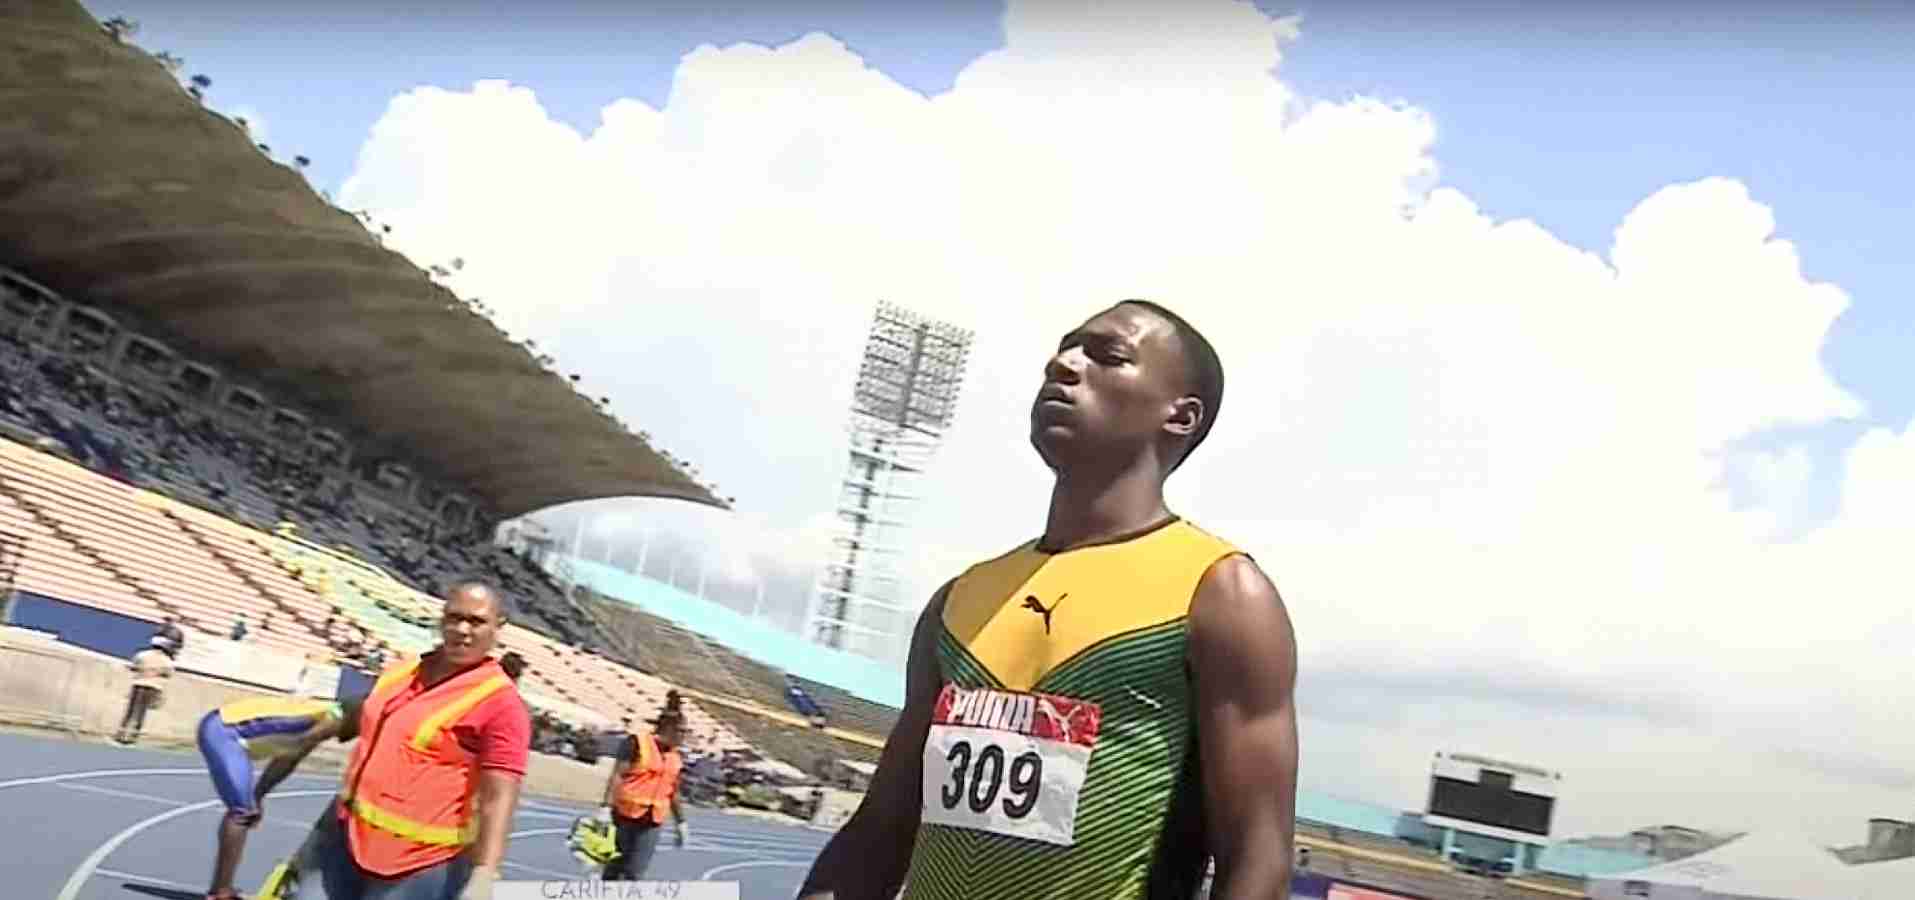 Another 2022 Carifta Games gold medal for Guyana; Top 200m runners advanced: Day 2 morning session report